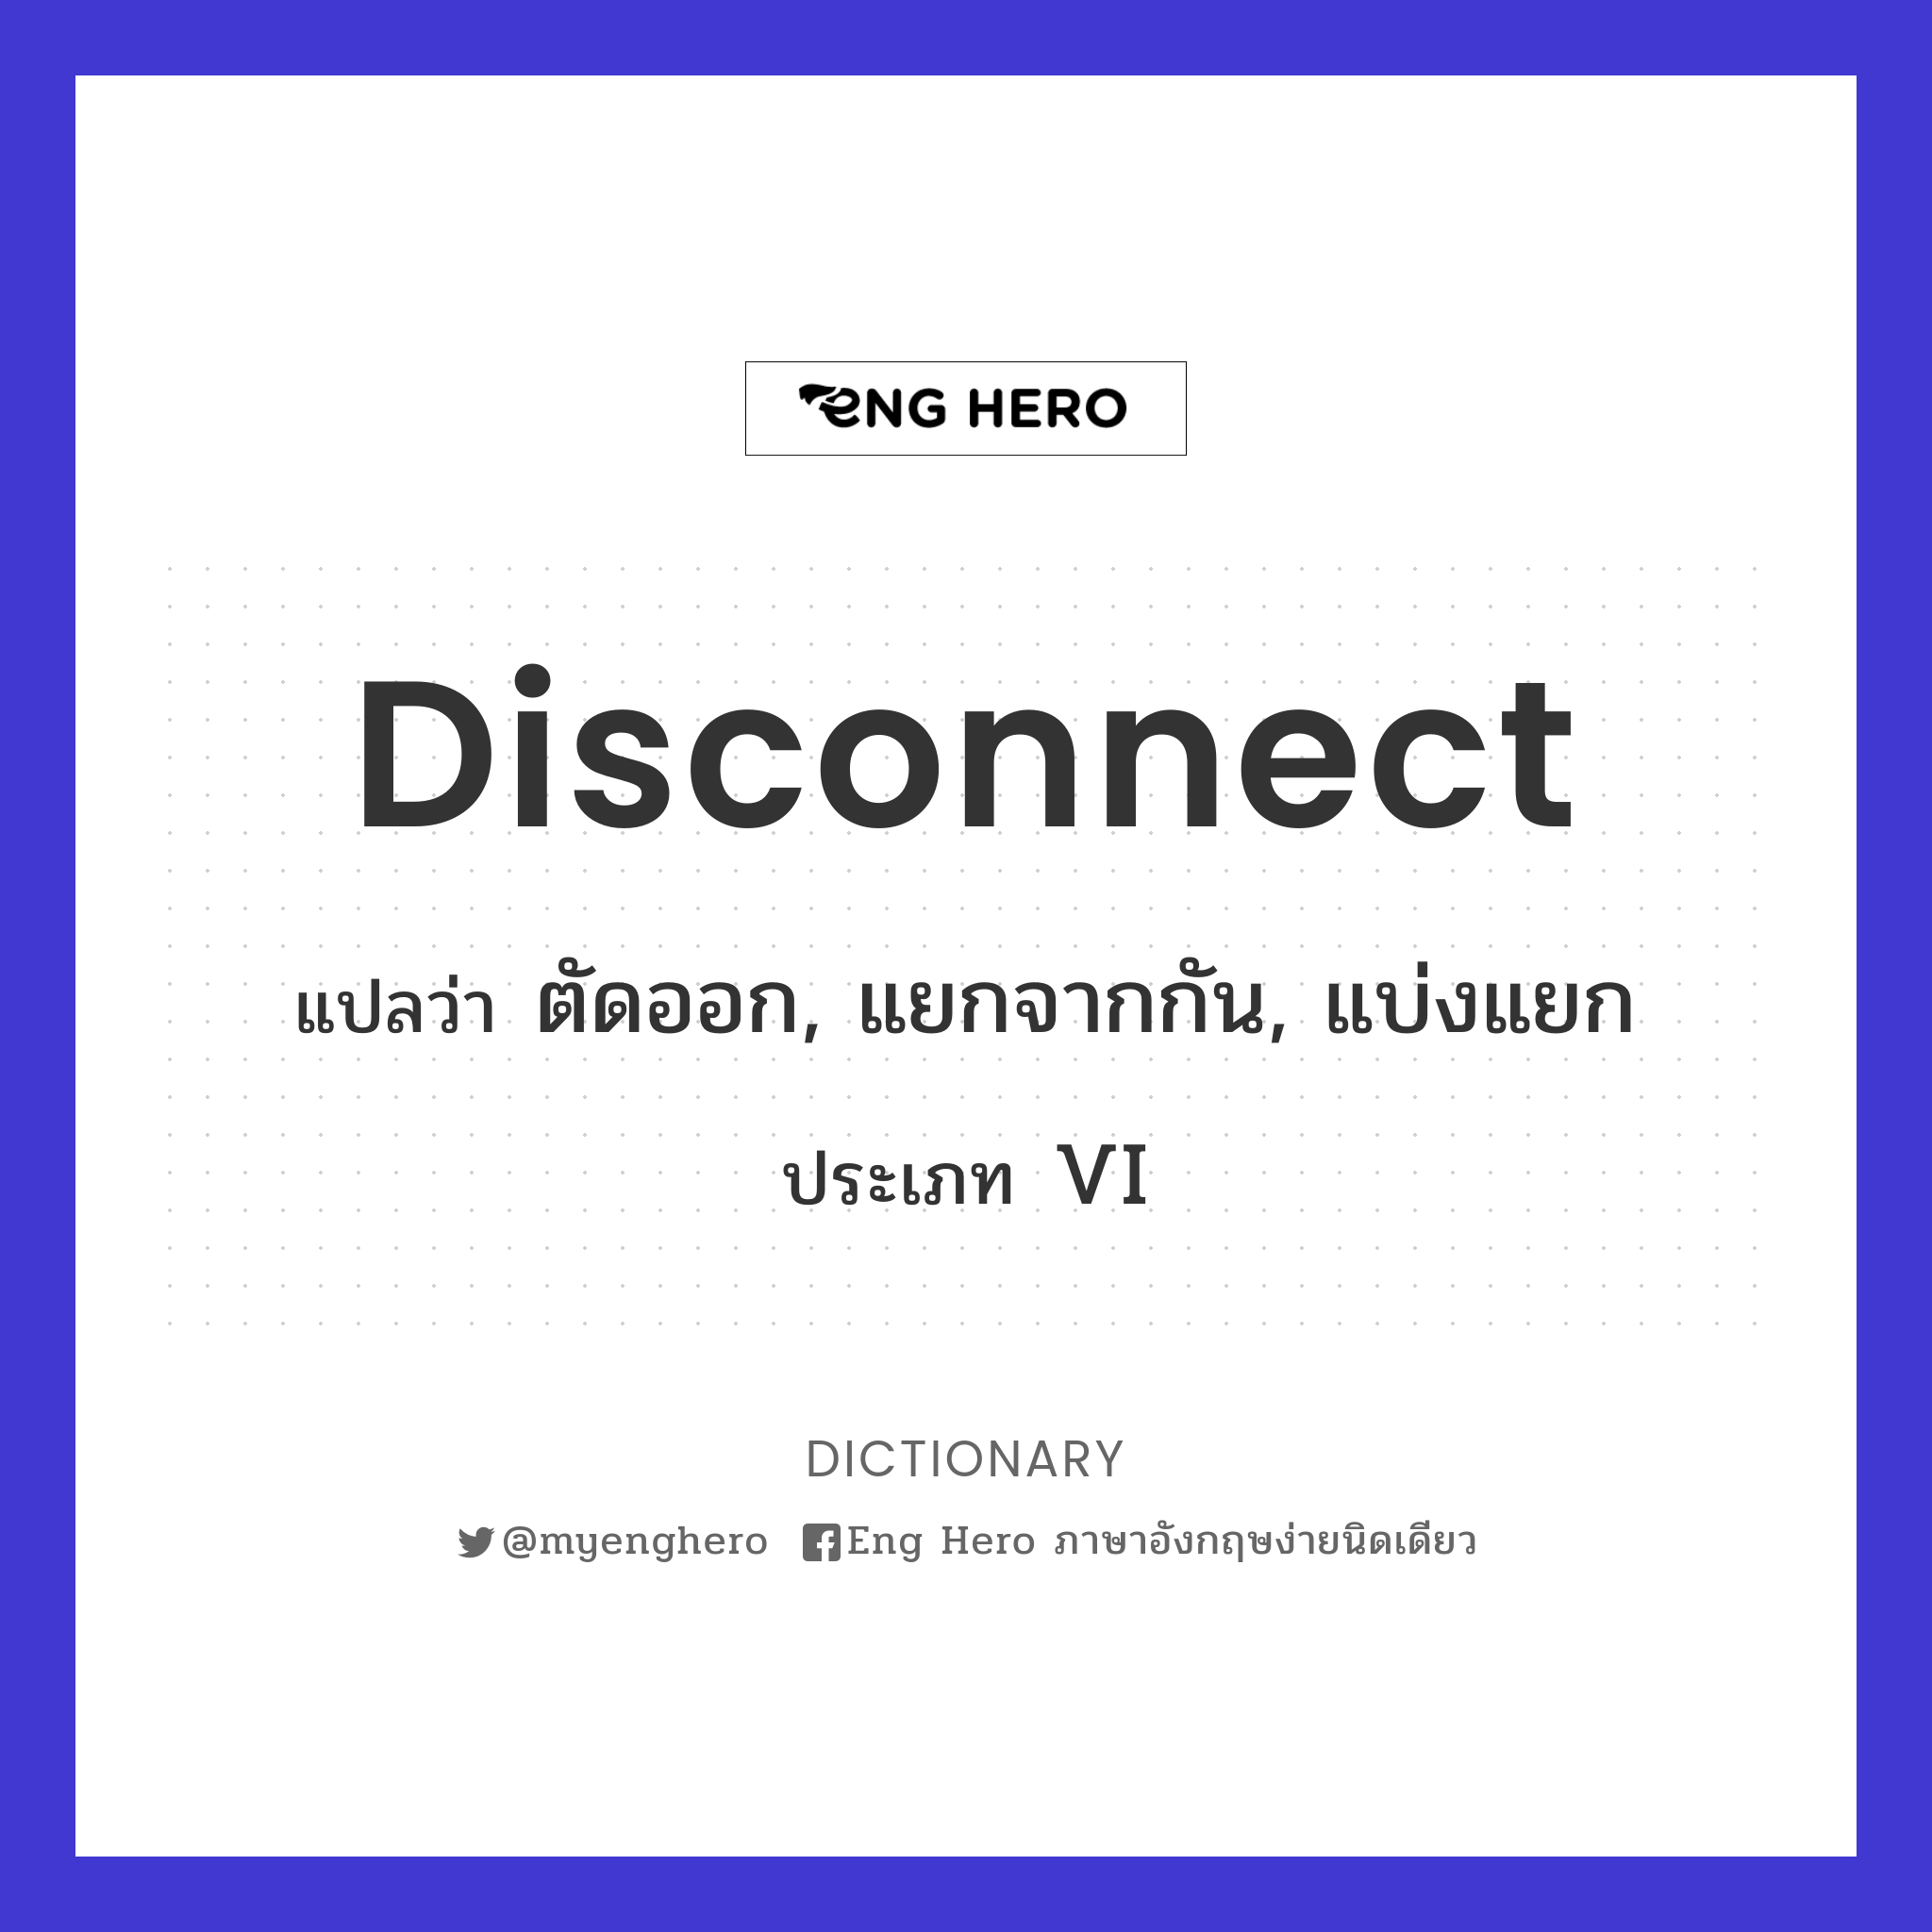 disconnect